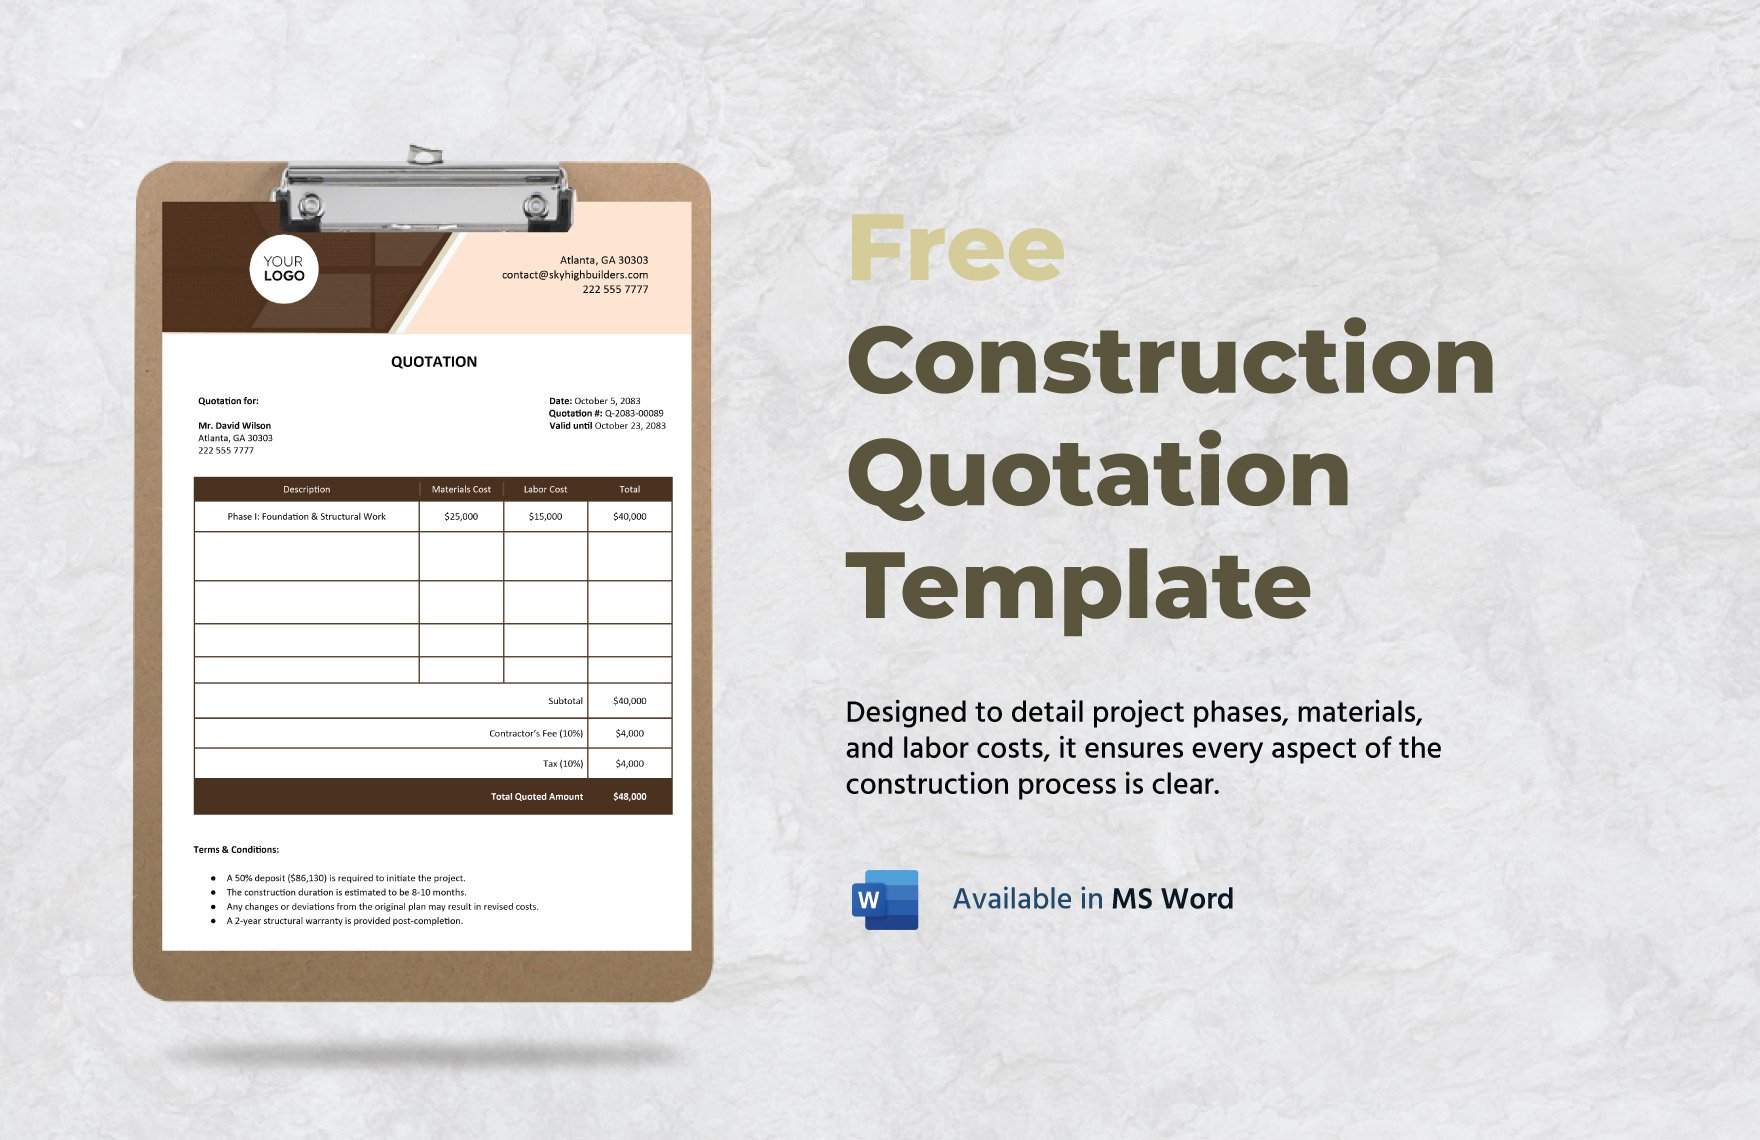 Free Construction Quotation Template